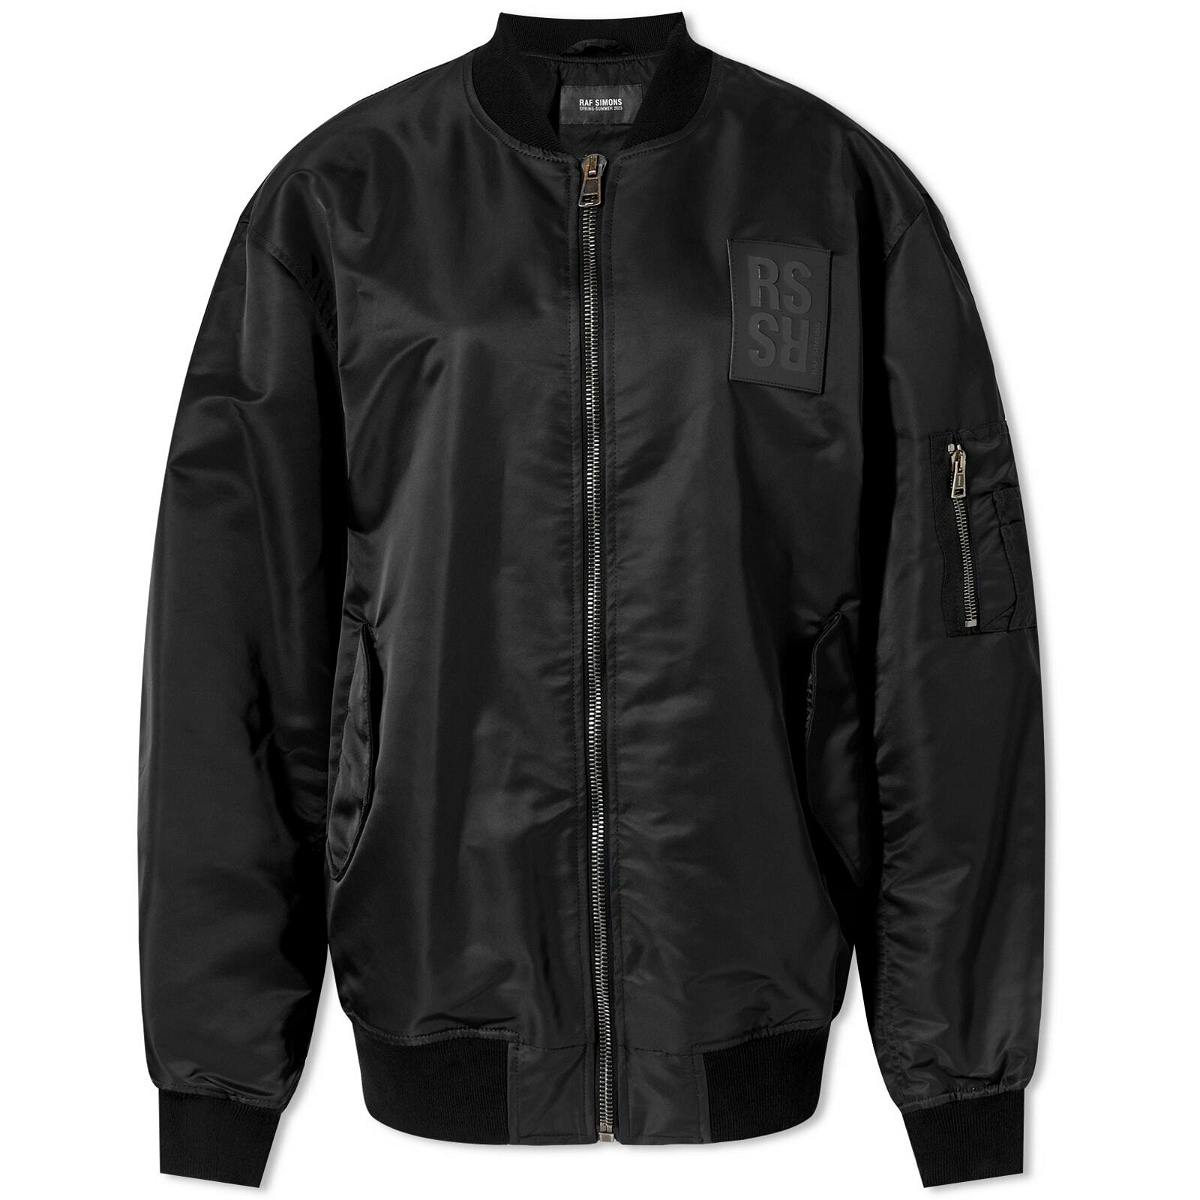 Raf Simons Women's Classic Leather Patch Bomber Jacket in Black Raf Simons